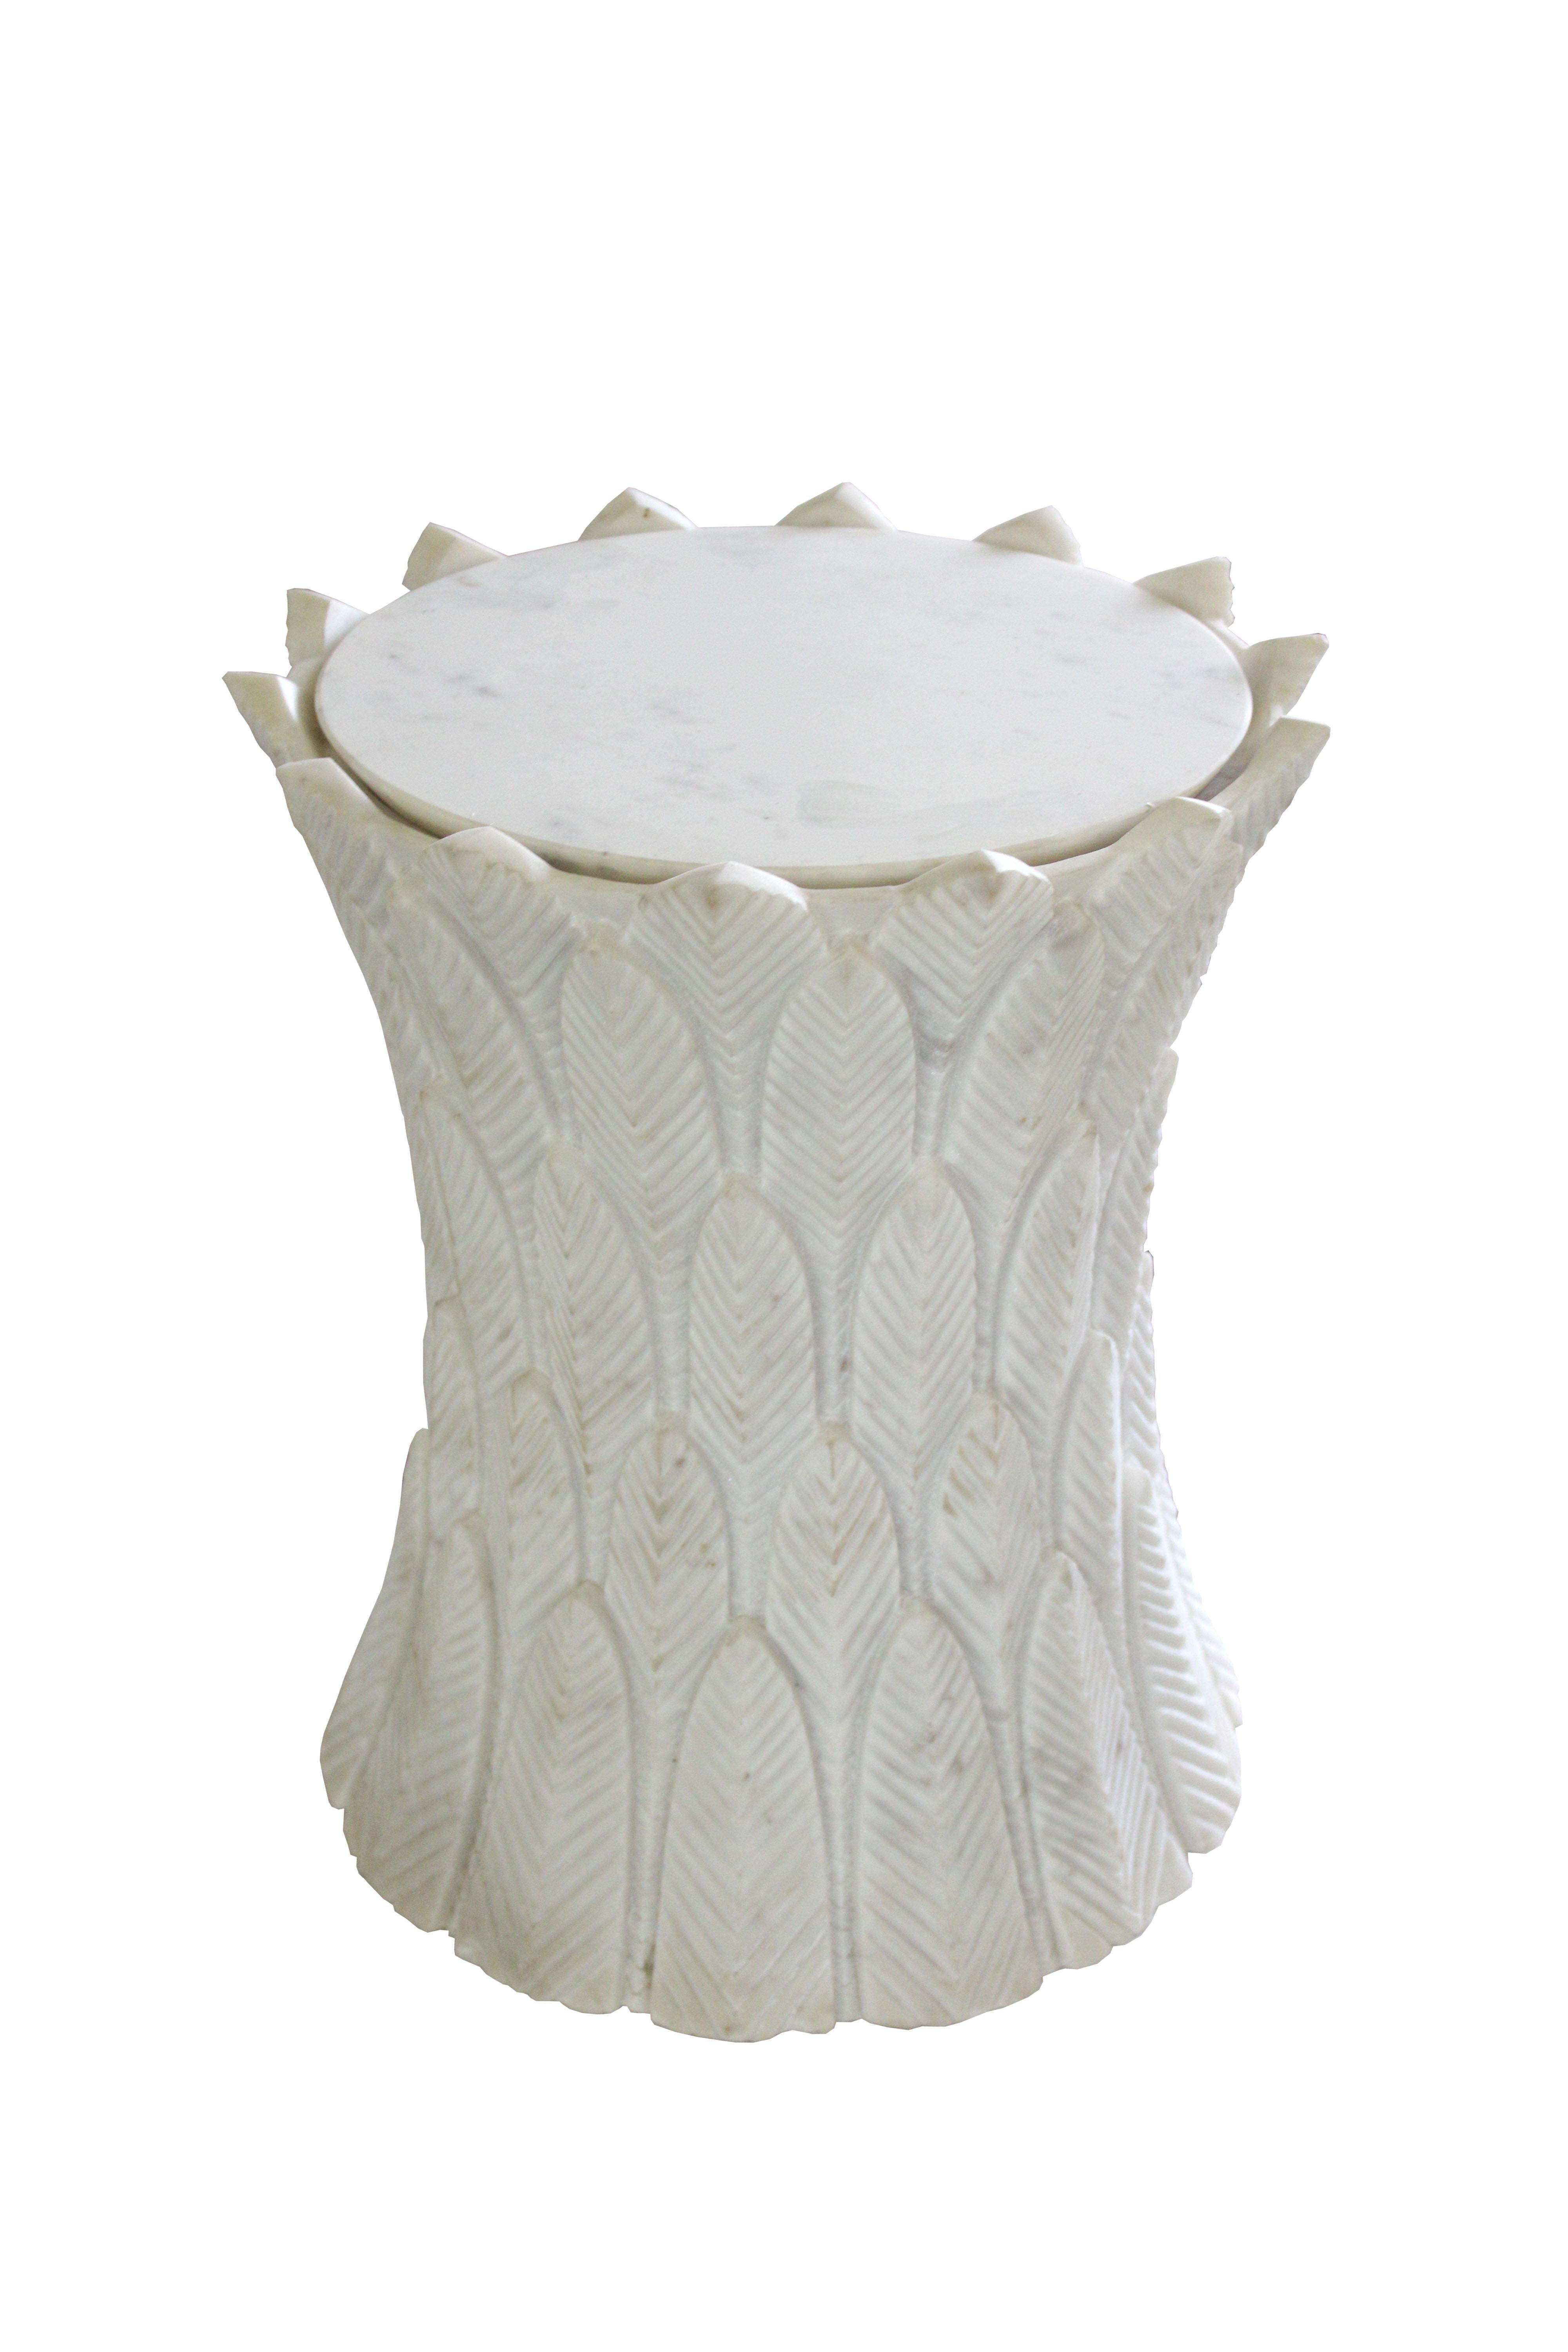 Contemporary Palm leaves Side Table in Agra White Marble by Stephanie Odegard For Sale